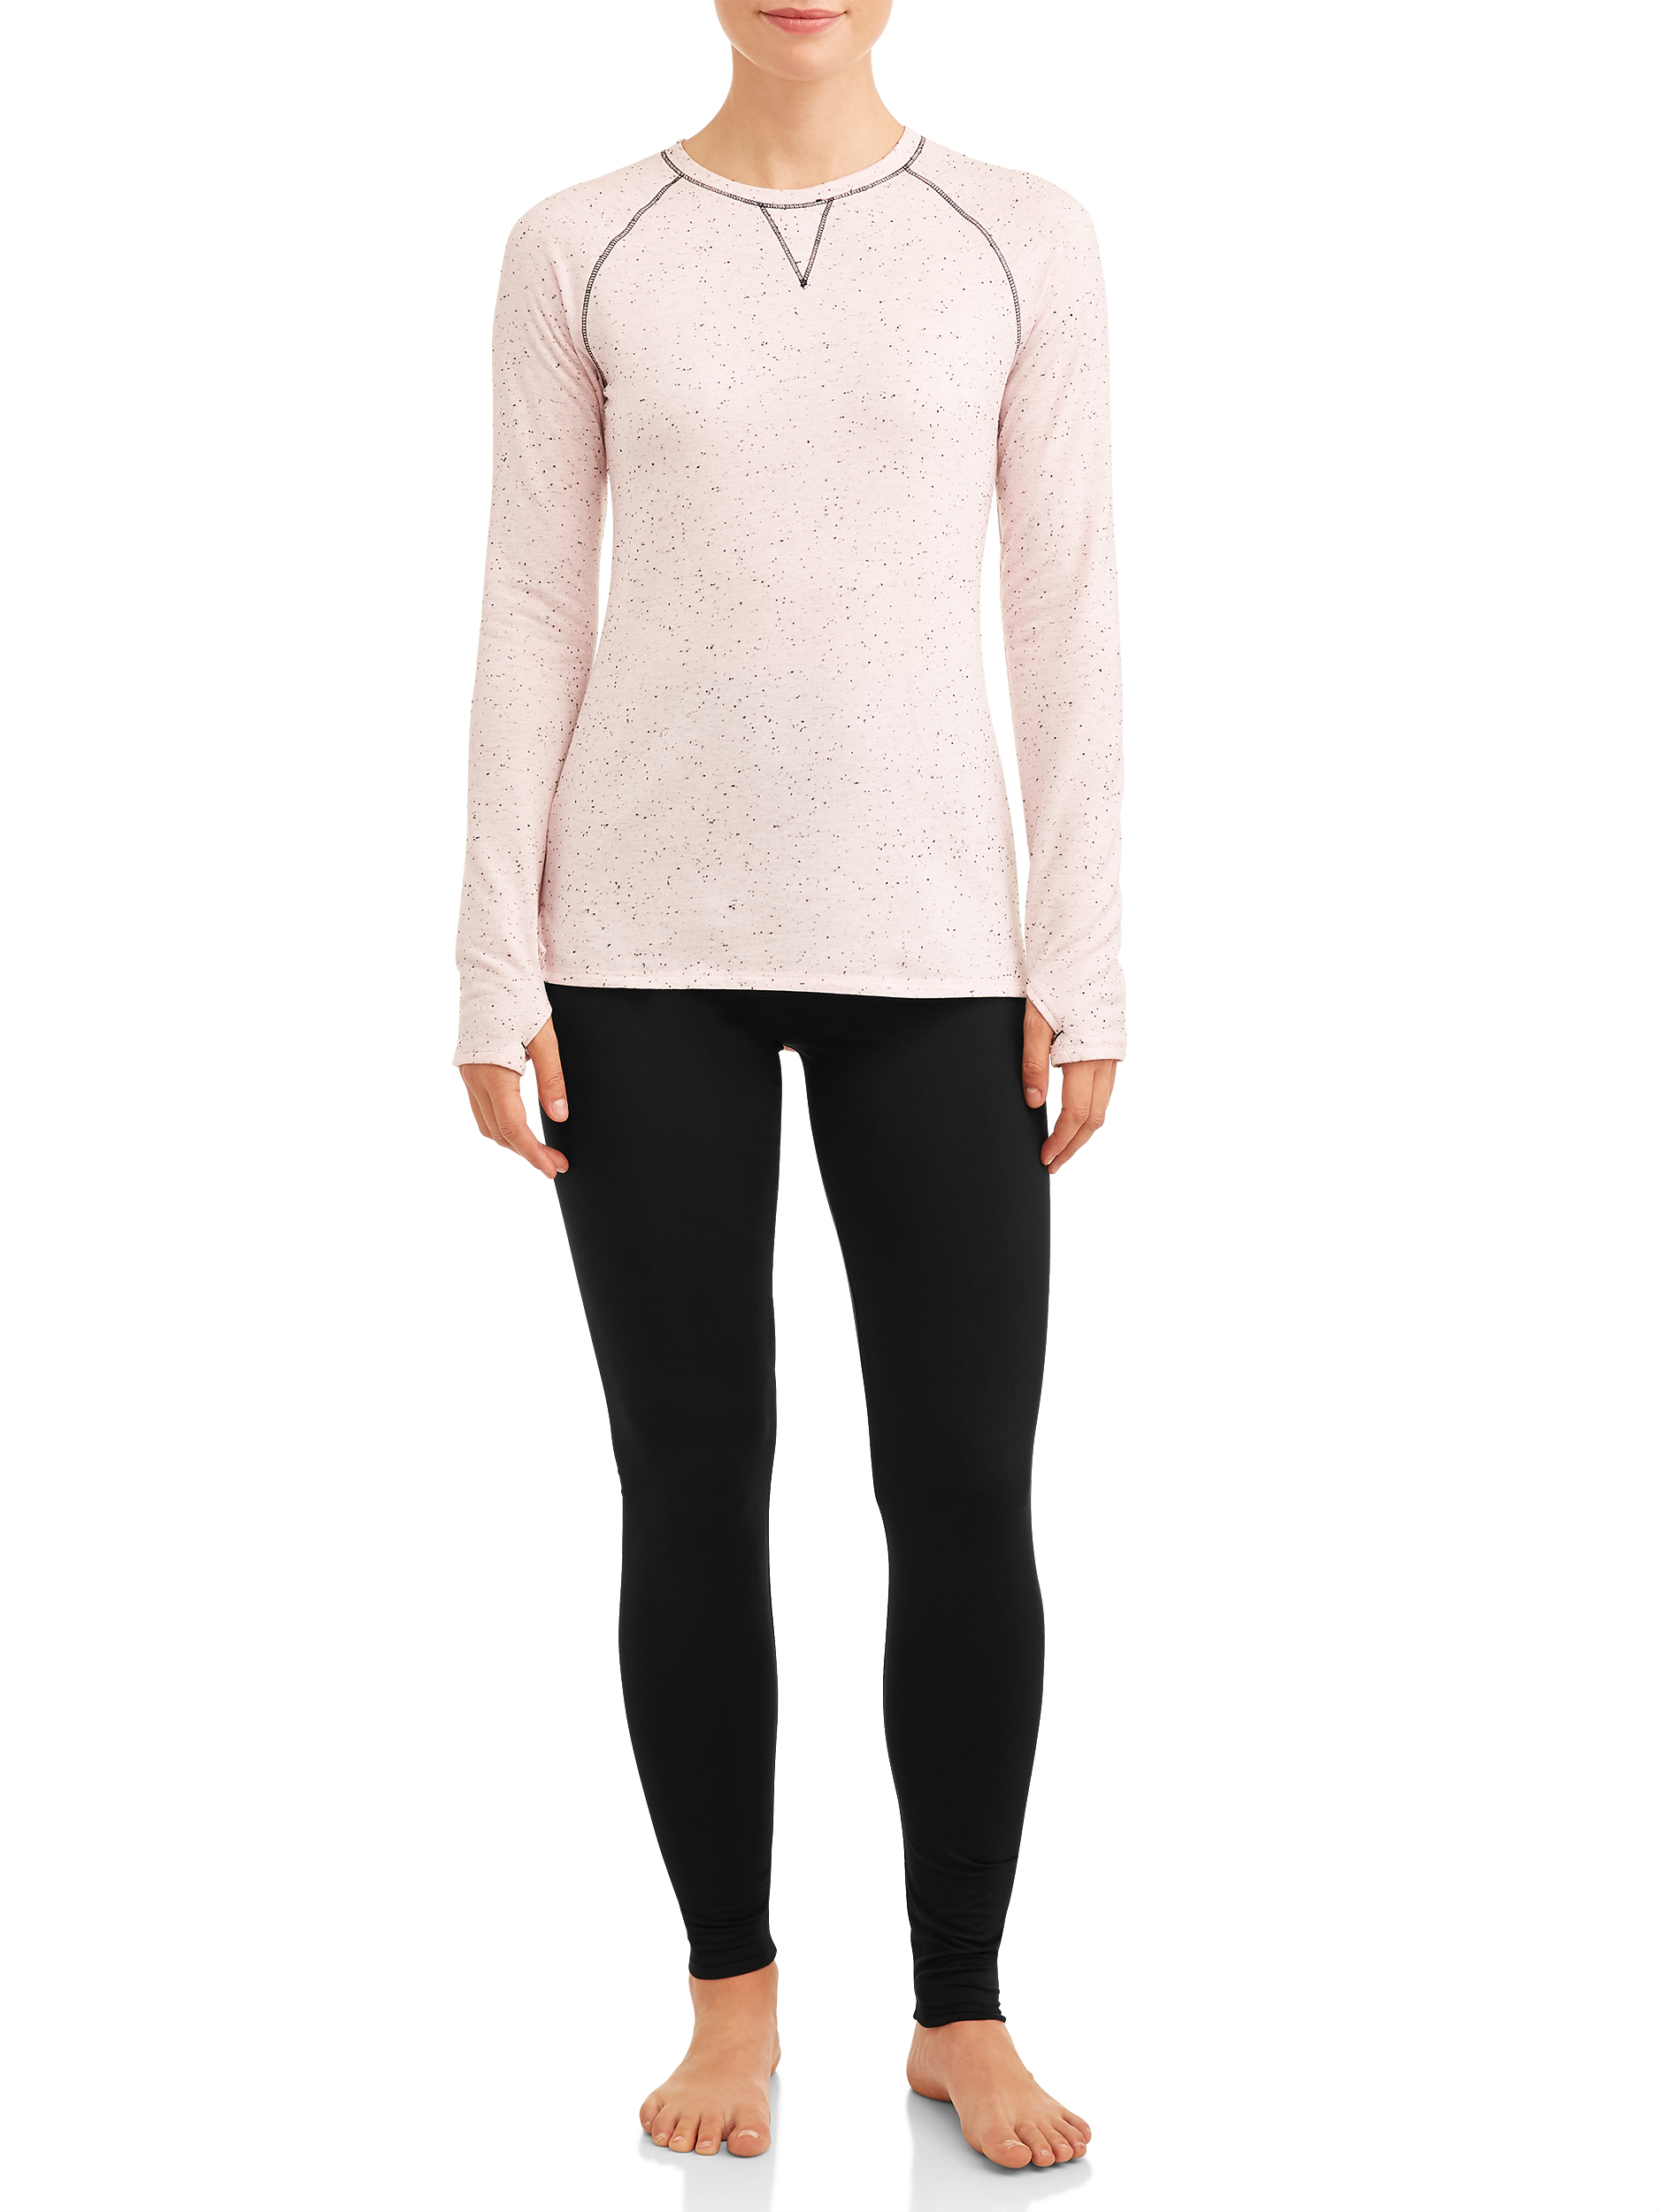 ClimateRight by Cuddl Duds Women's and Women's Plus Far Infrared Warm Long Underwear Legging - image 2 of 5